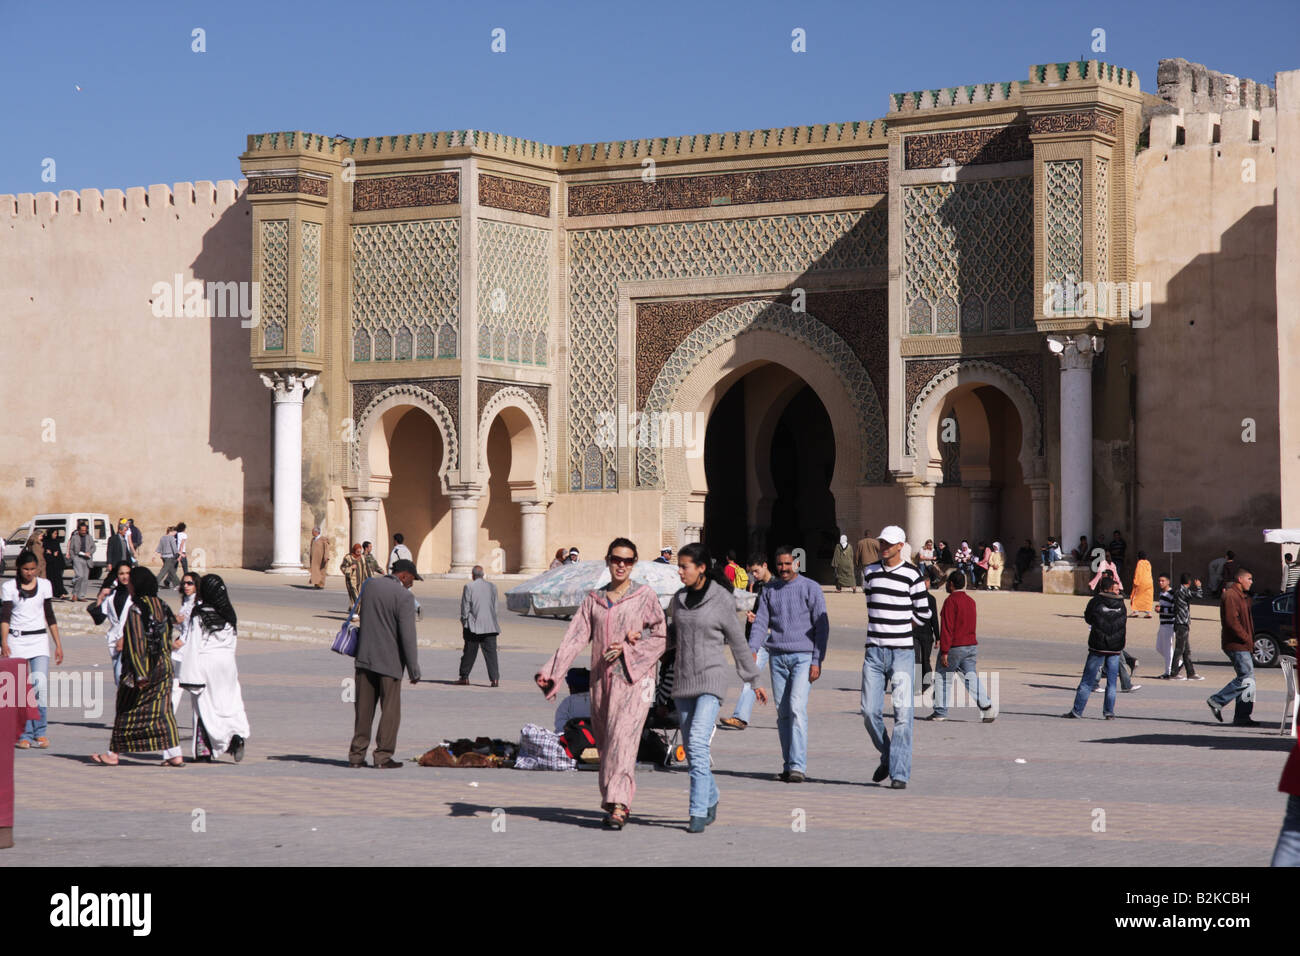 Bab Mansour in Meknes, Morocco Stock Photo